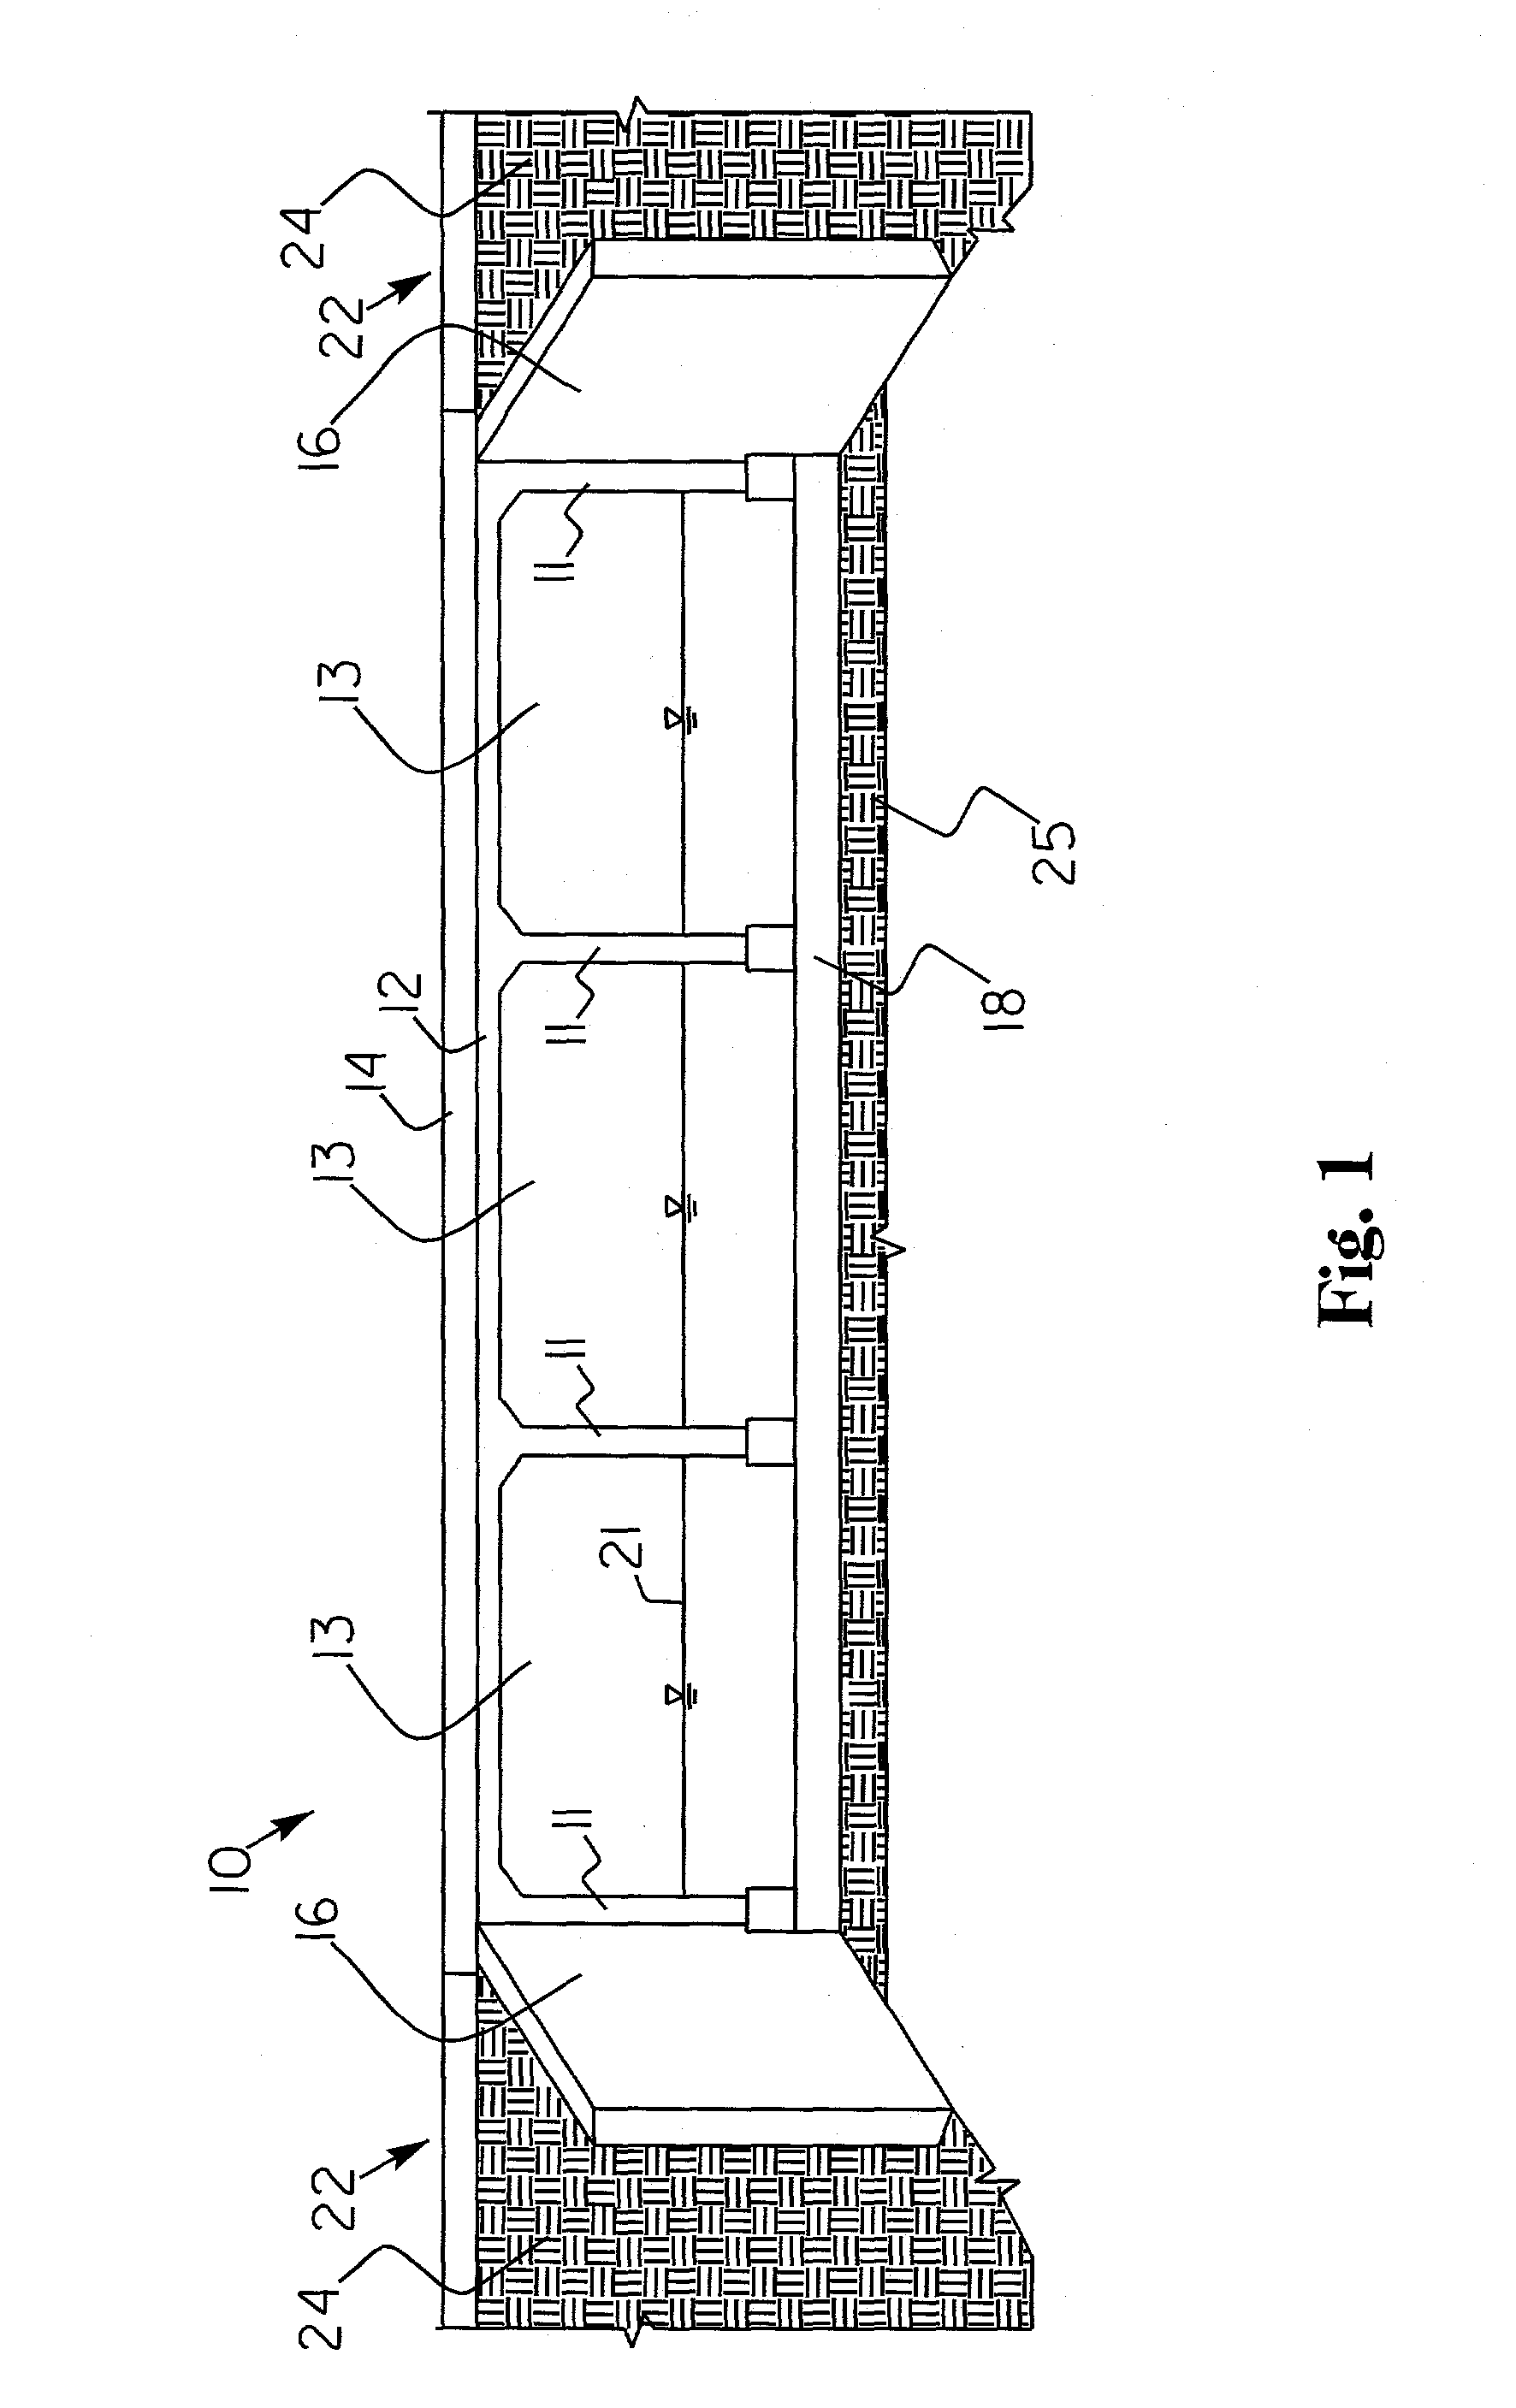 Portable cofferdam and method for stabilizing the structural integrity of box culvert bridges